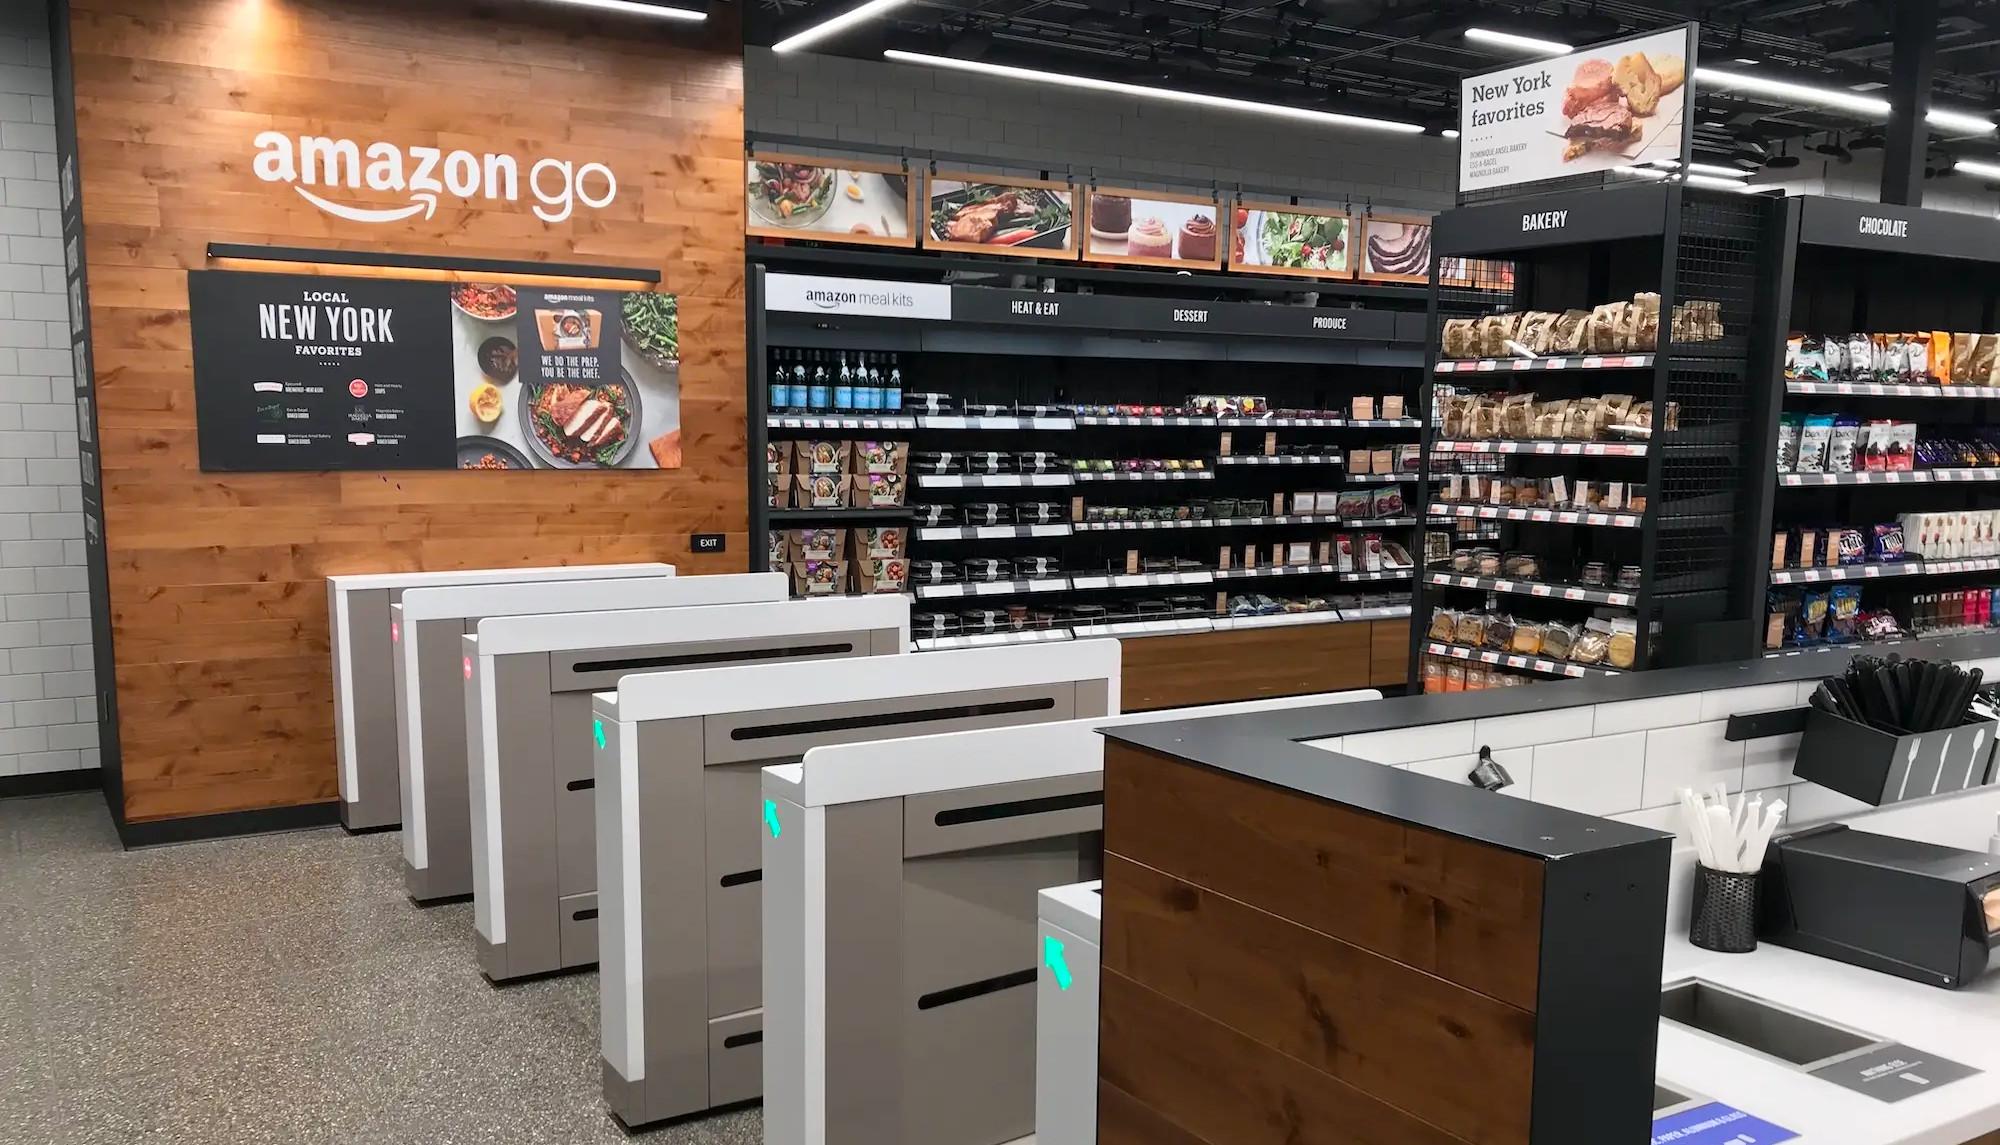 Amazon Go Grocery is an example of design thinking in business